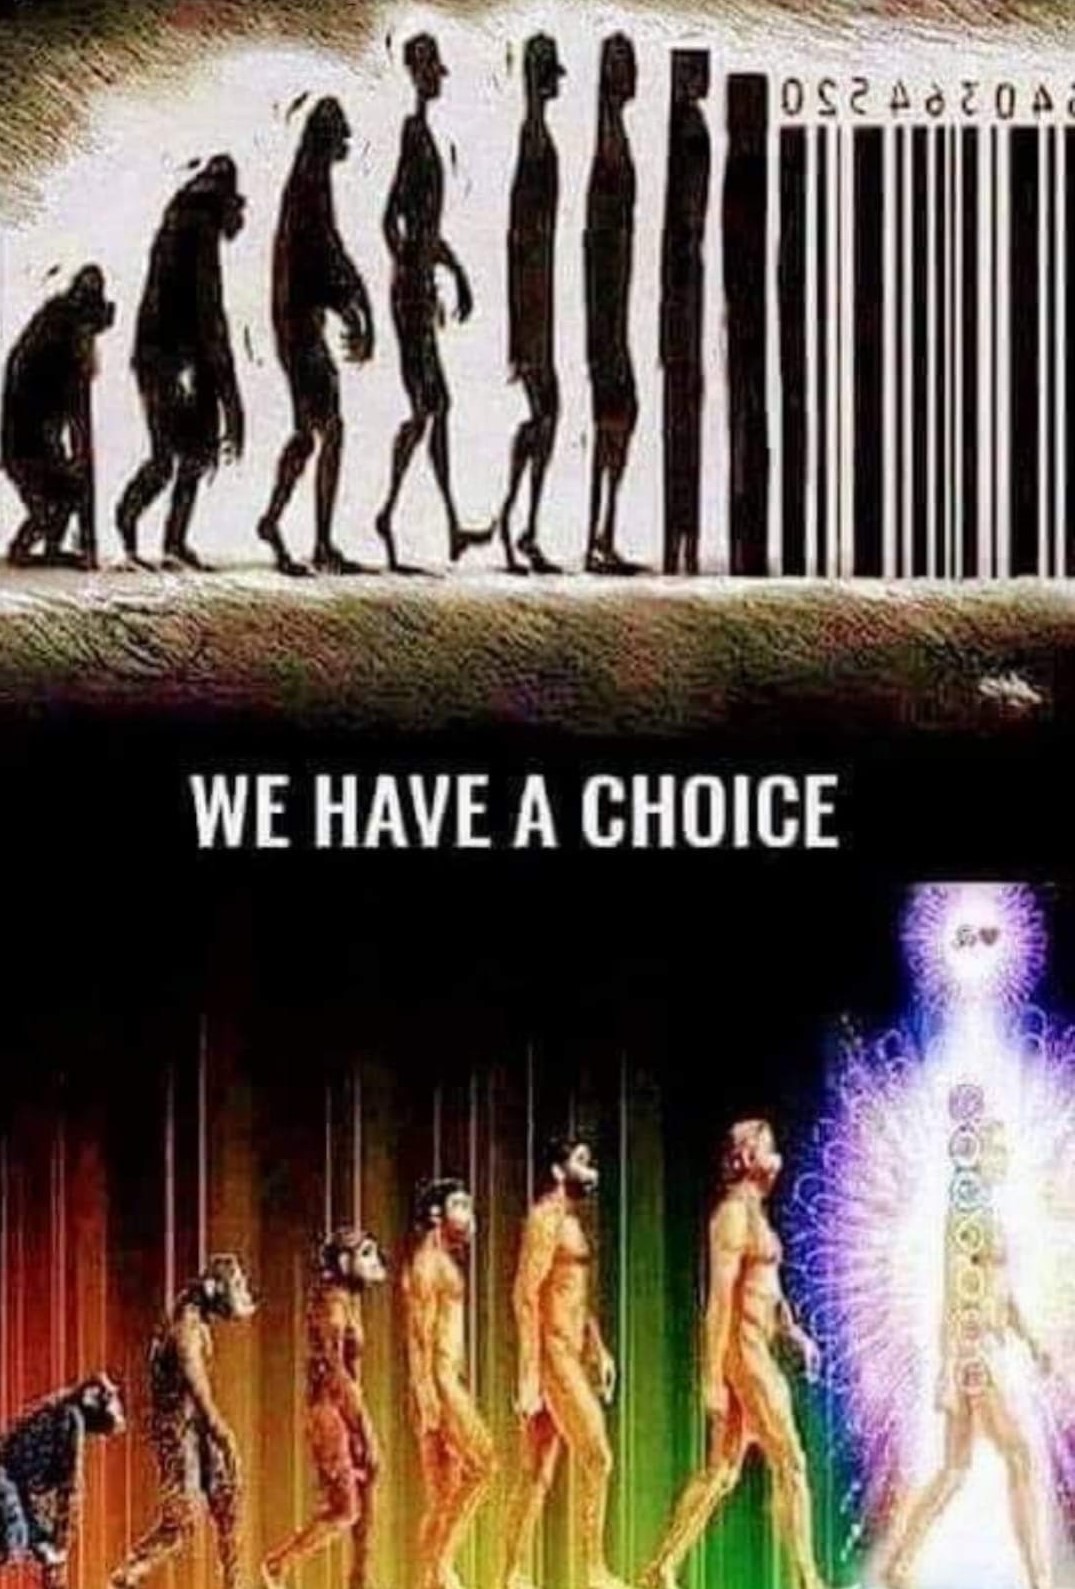 We have a choice